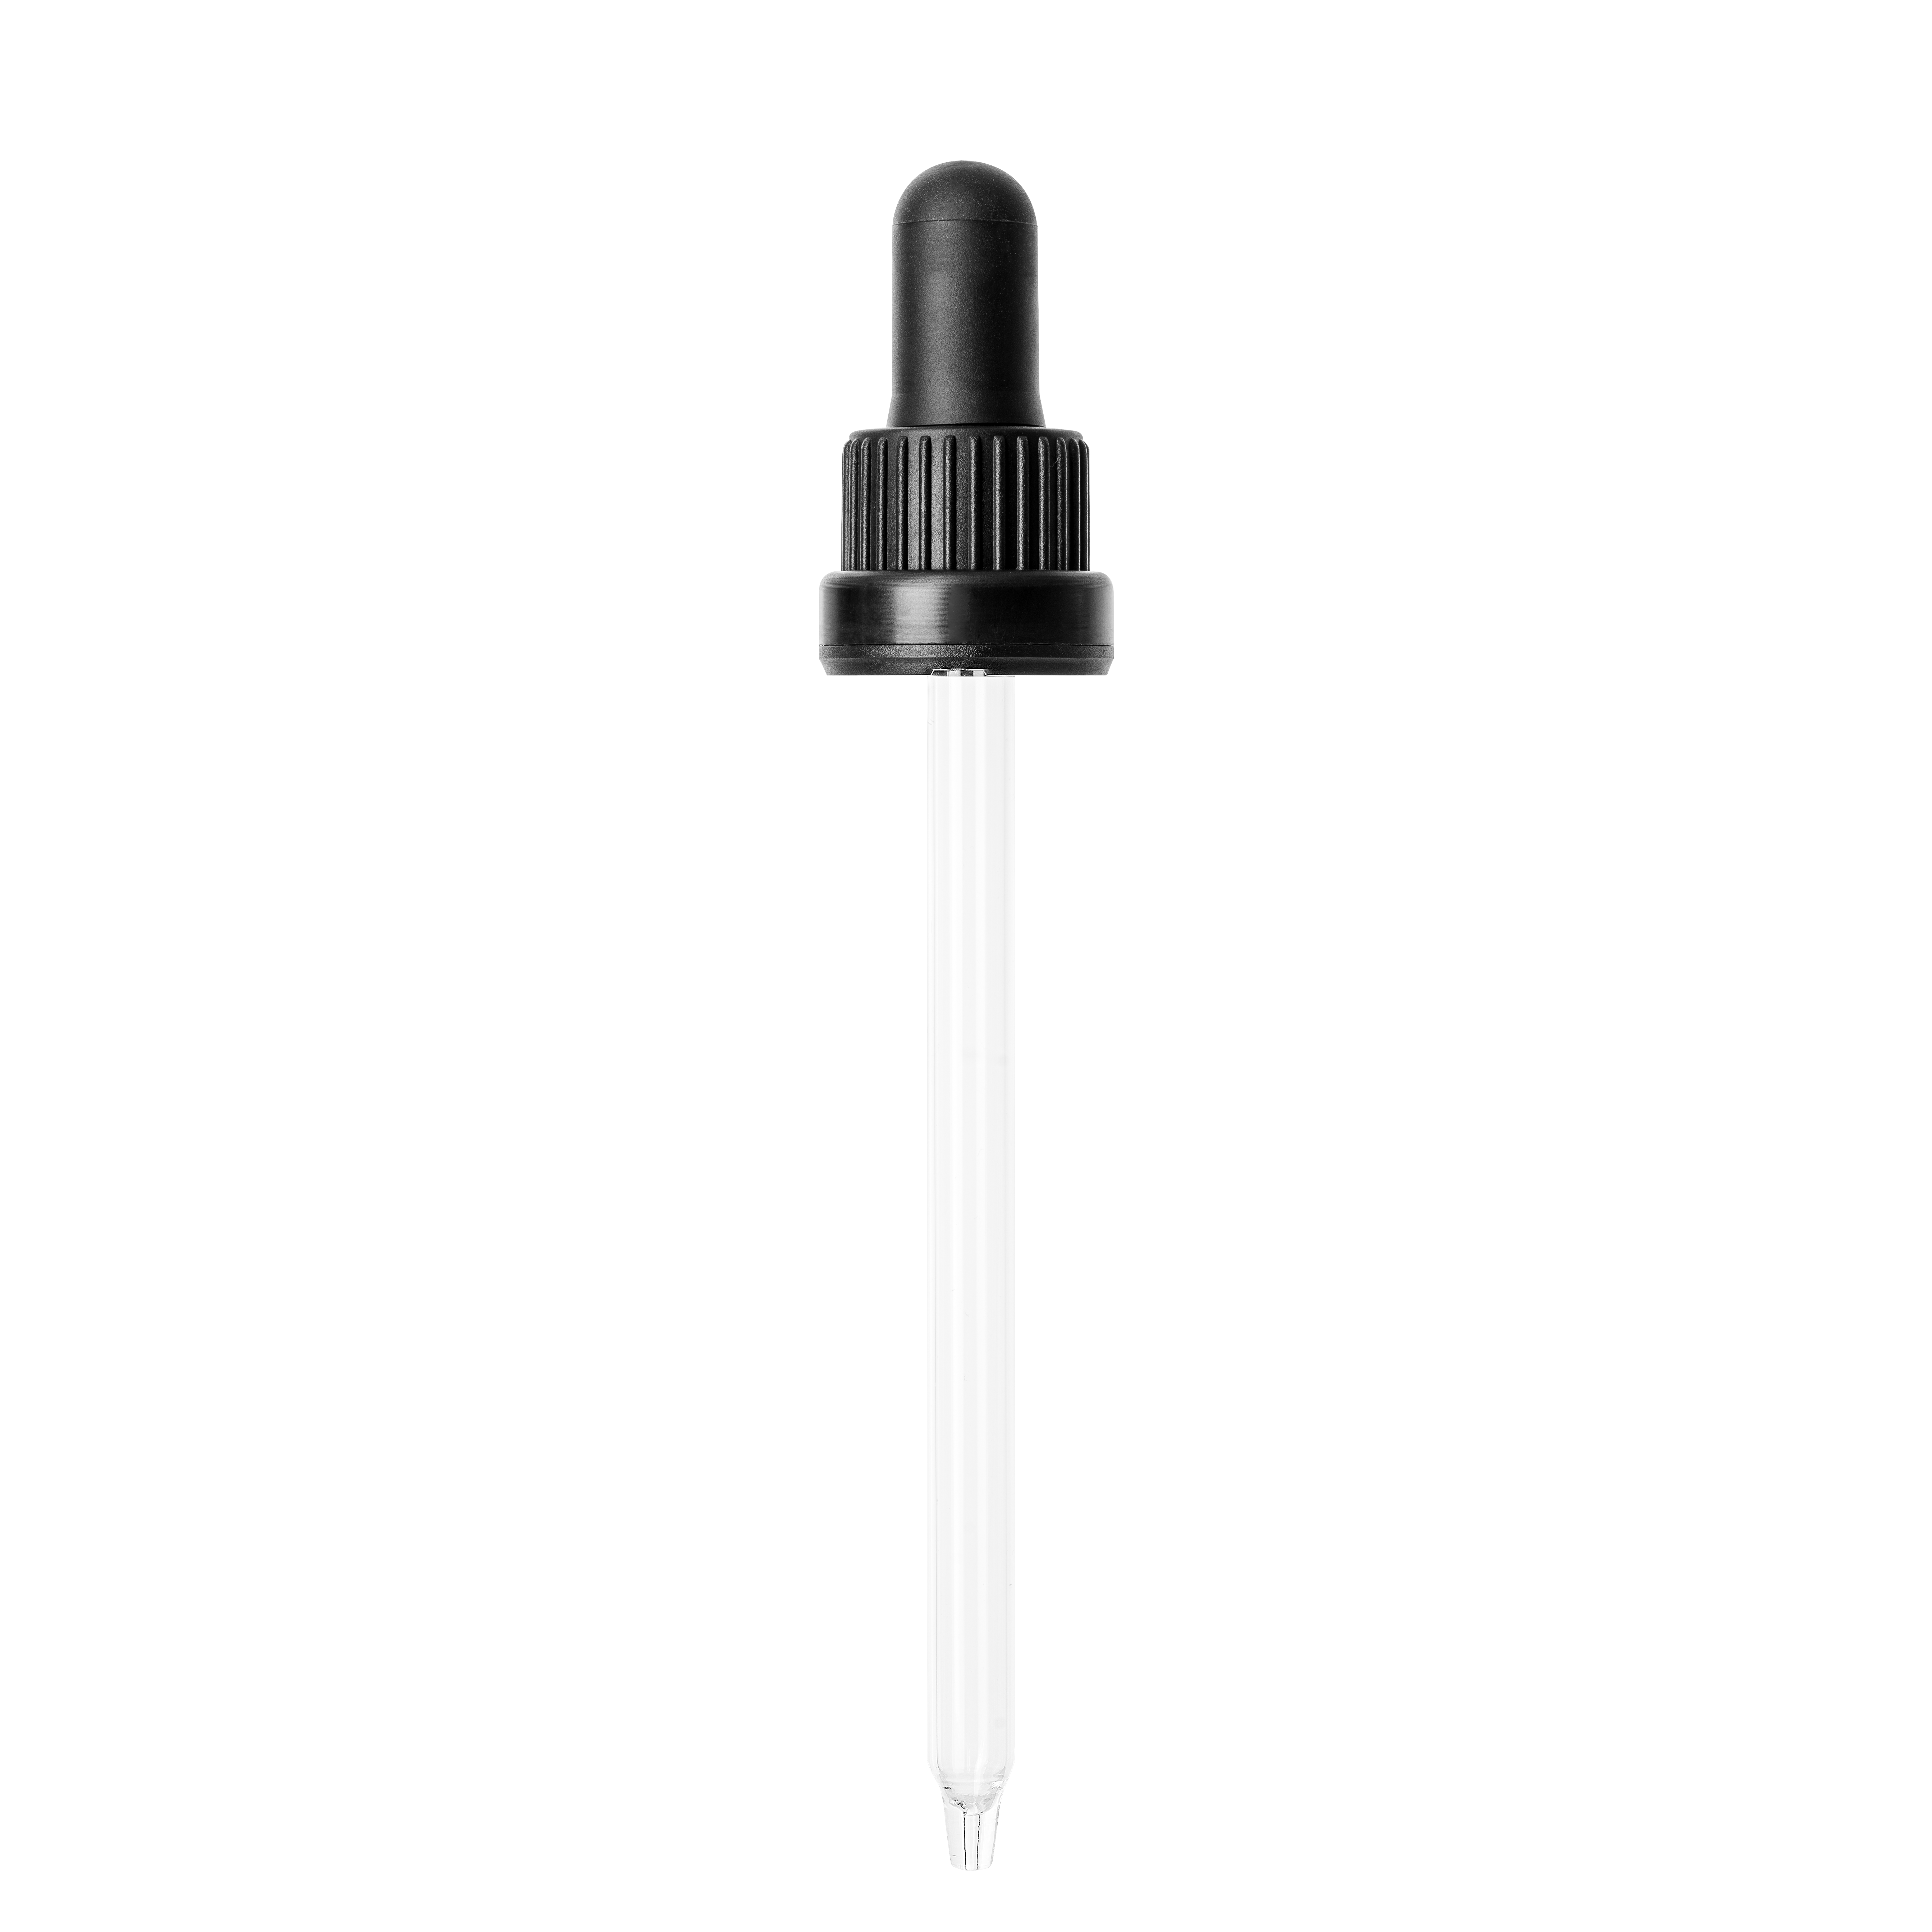 Pipette tamper evident DIN18, III, black, ribbed, bulb TPE, dose 1.0ml, conical tip (Orion 100)